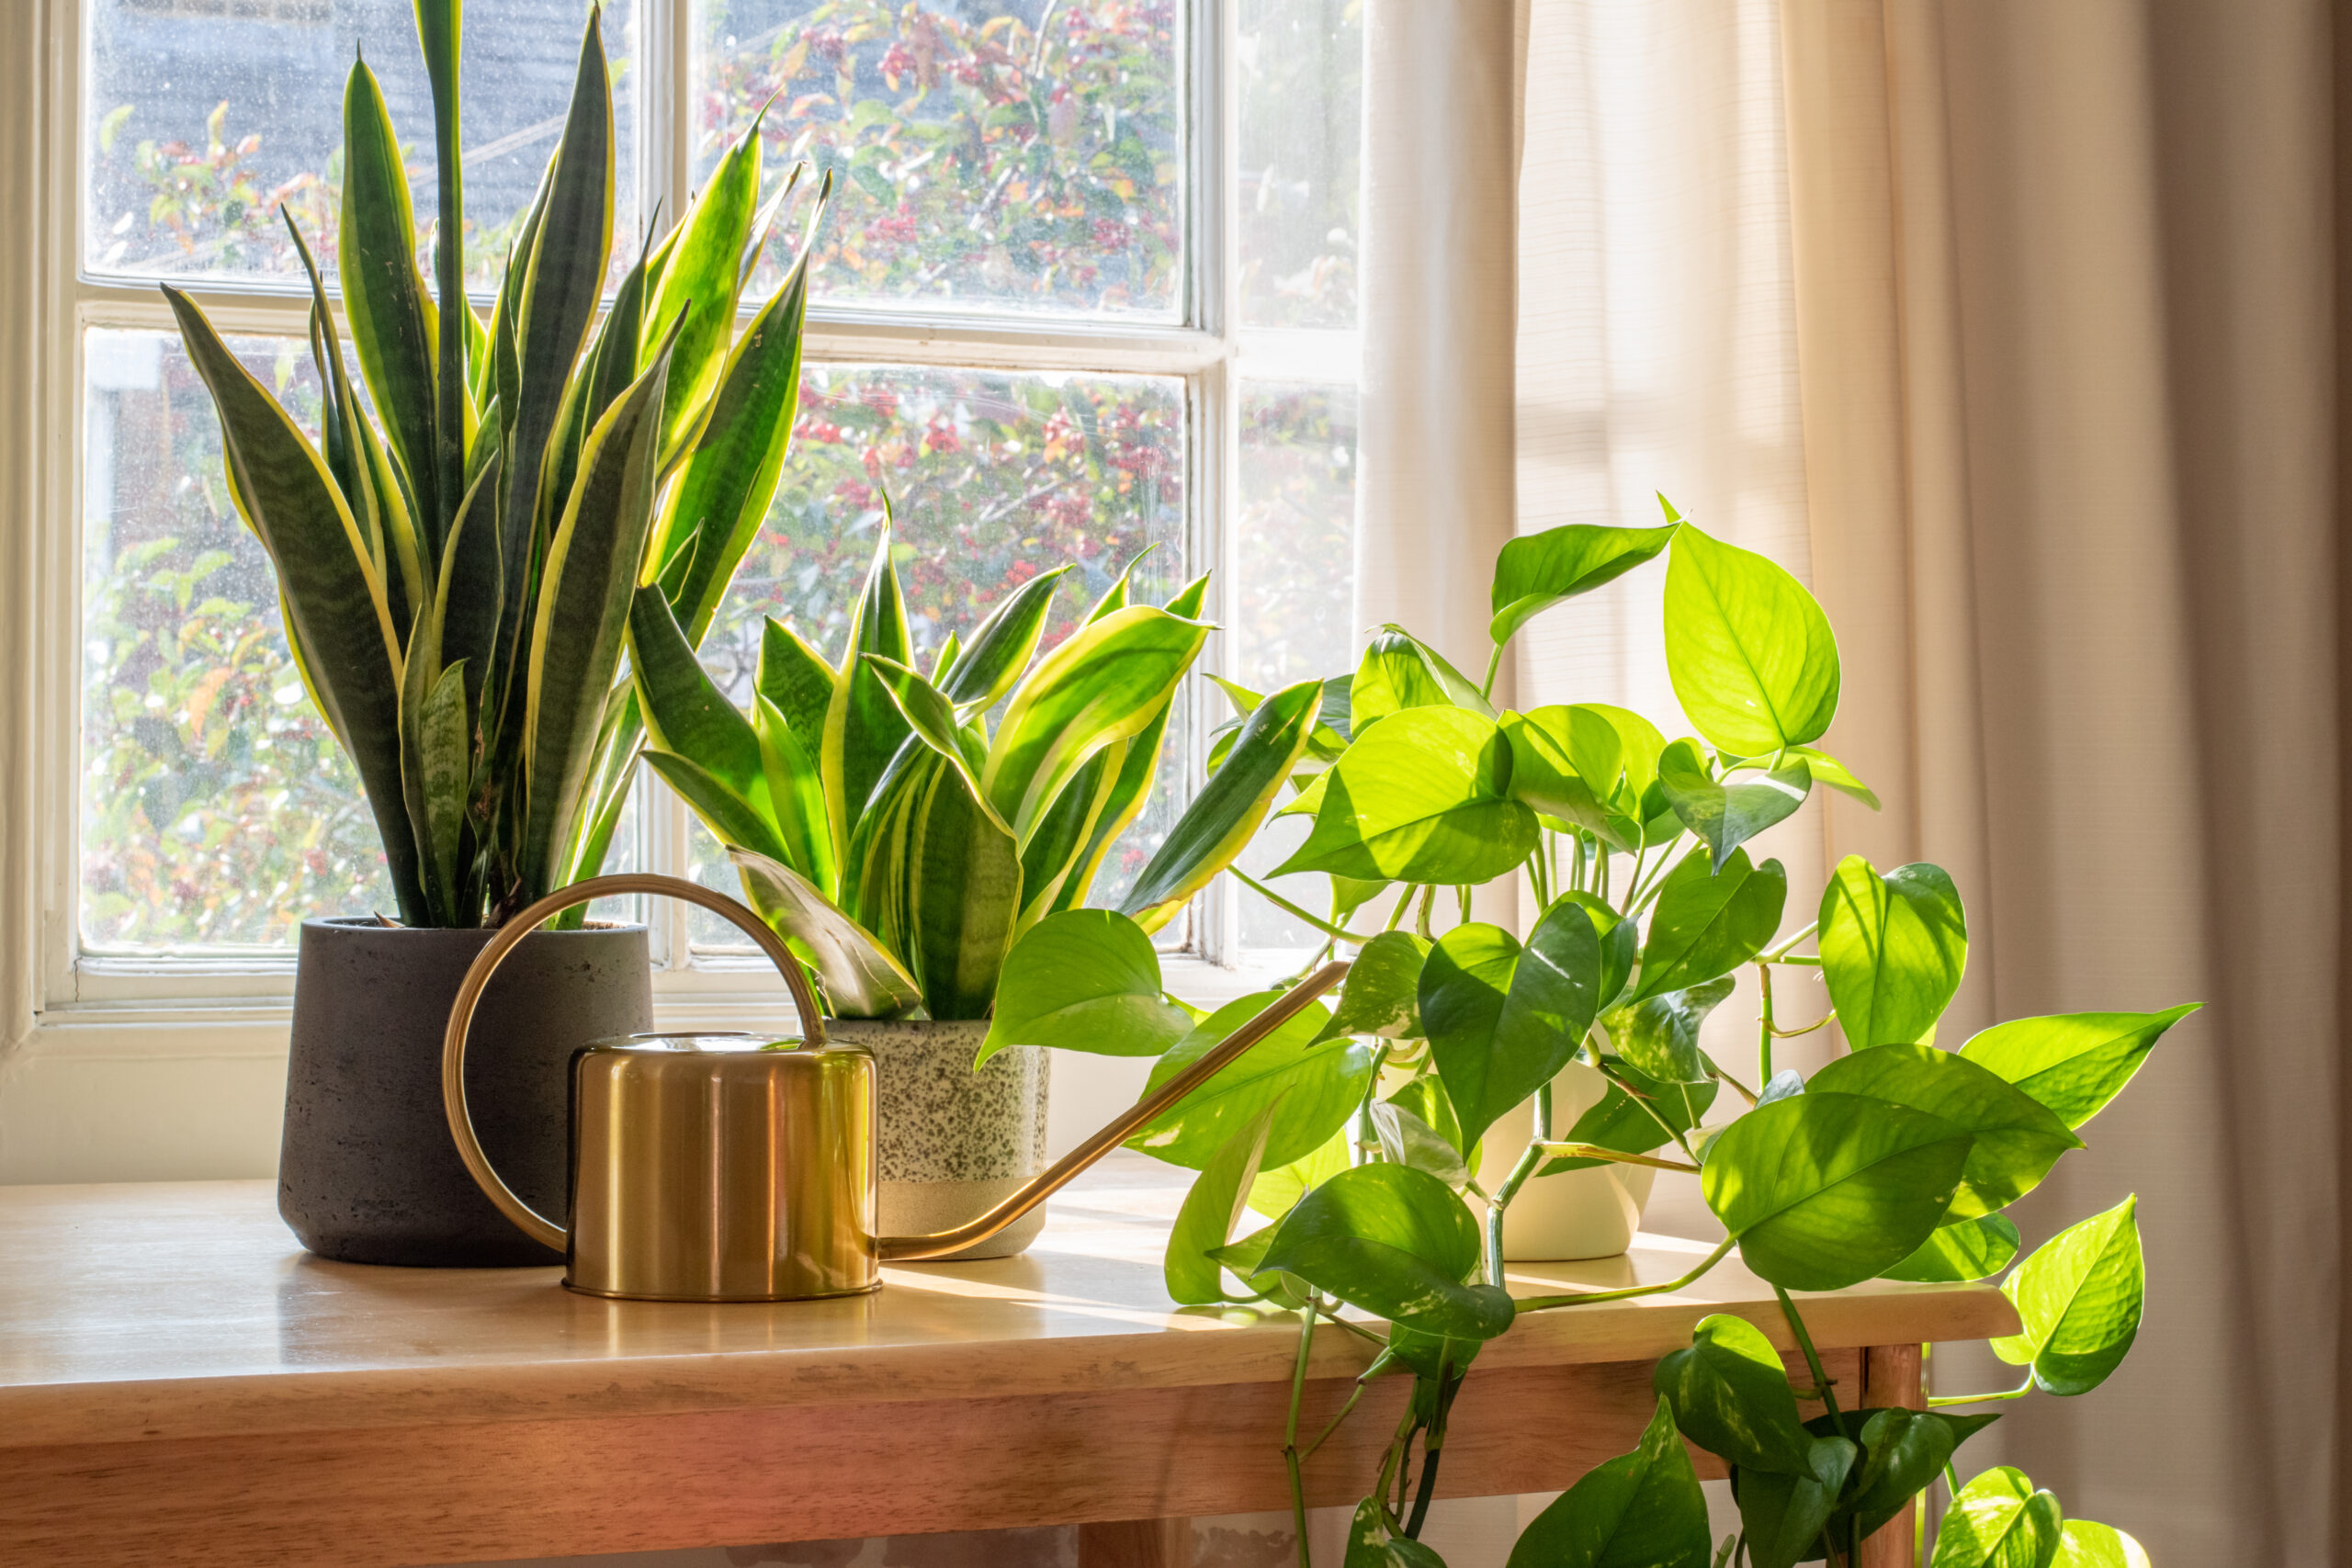 Indoor plants by window with watering can on wooden surface.